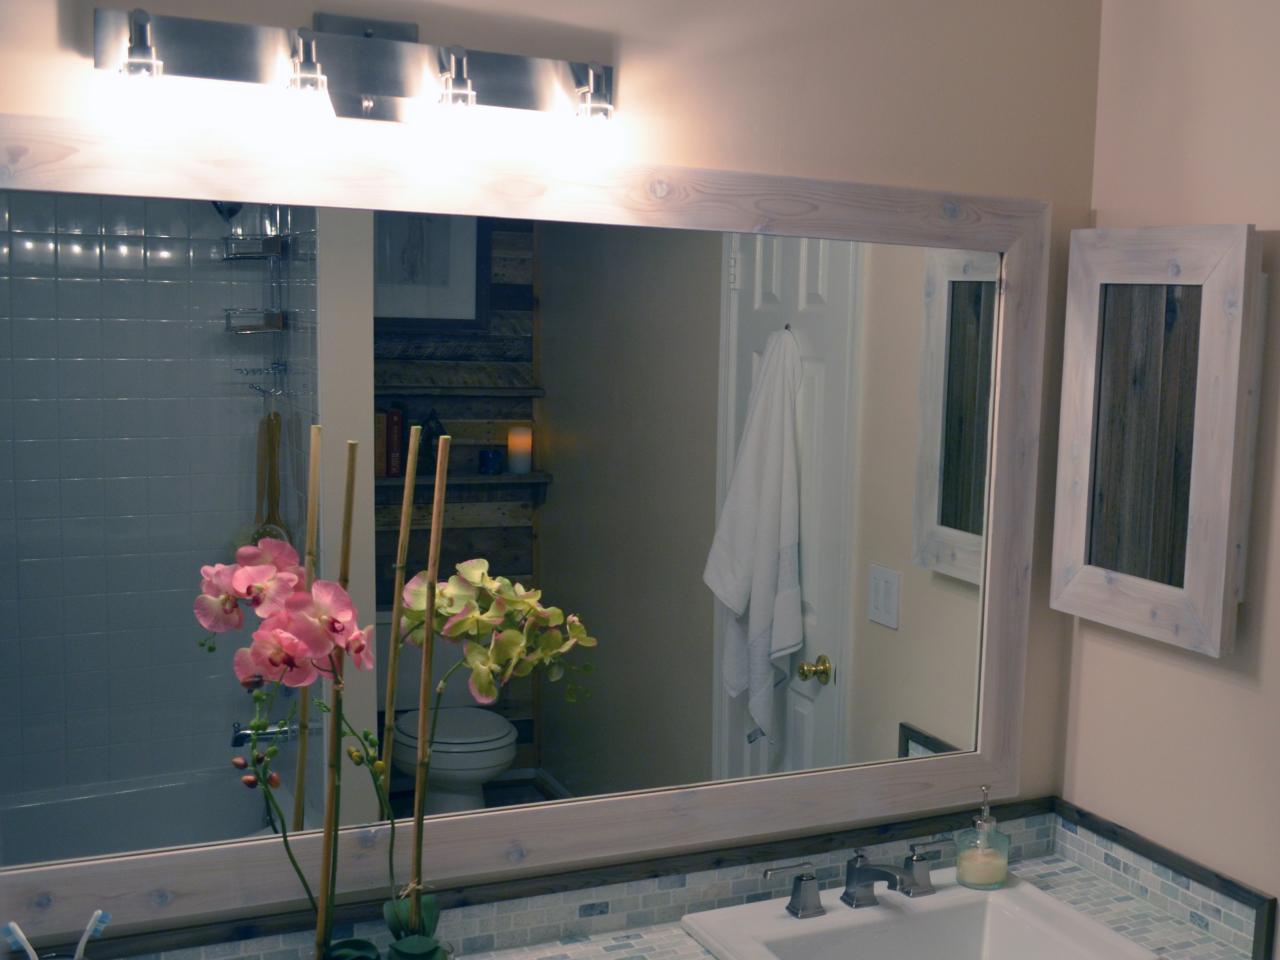 How To Replace A Bathroom Light Fixture, Hanging Bathroom Light Fixtures